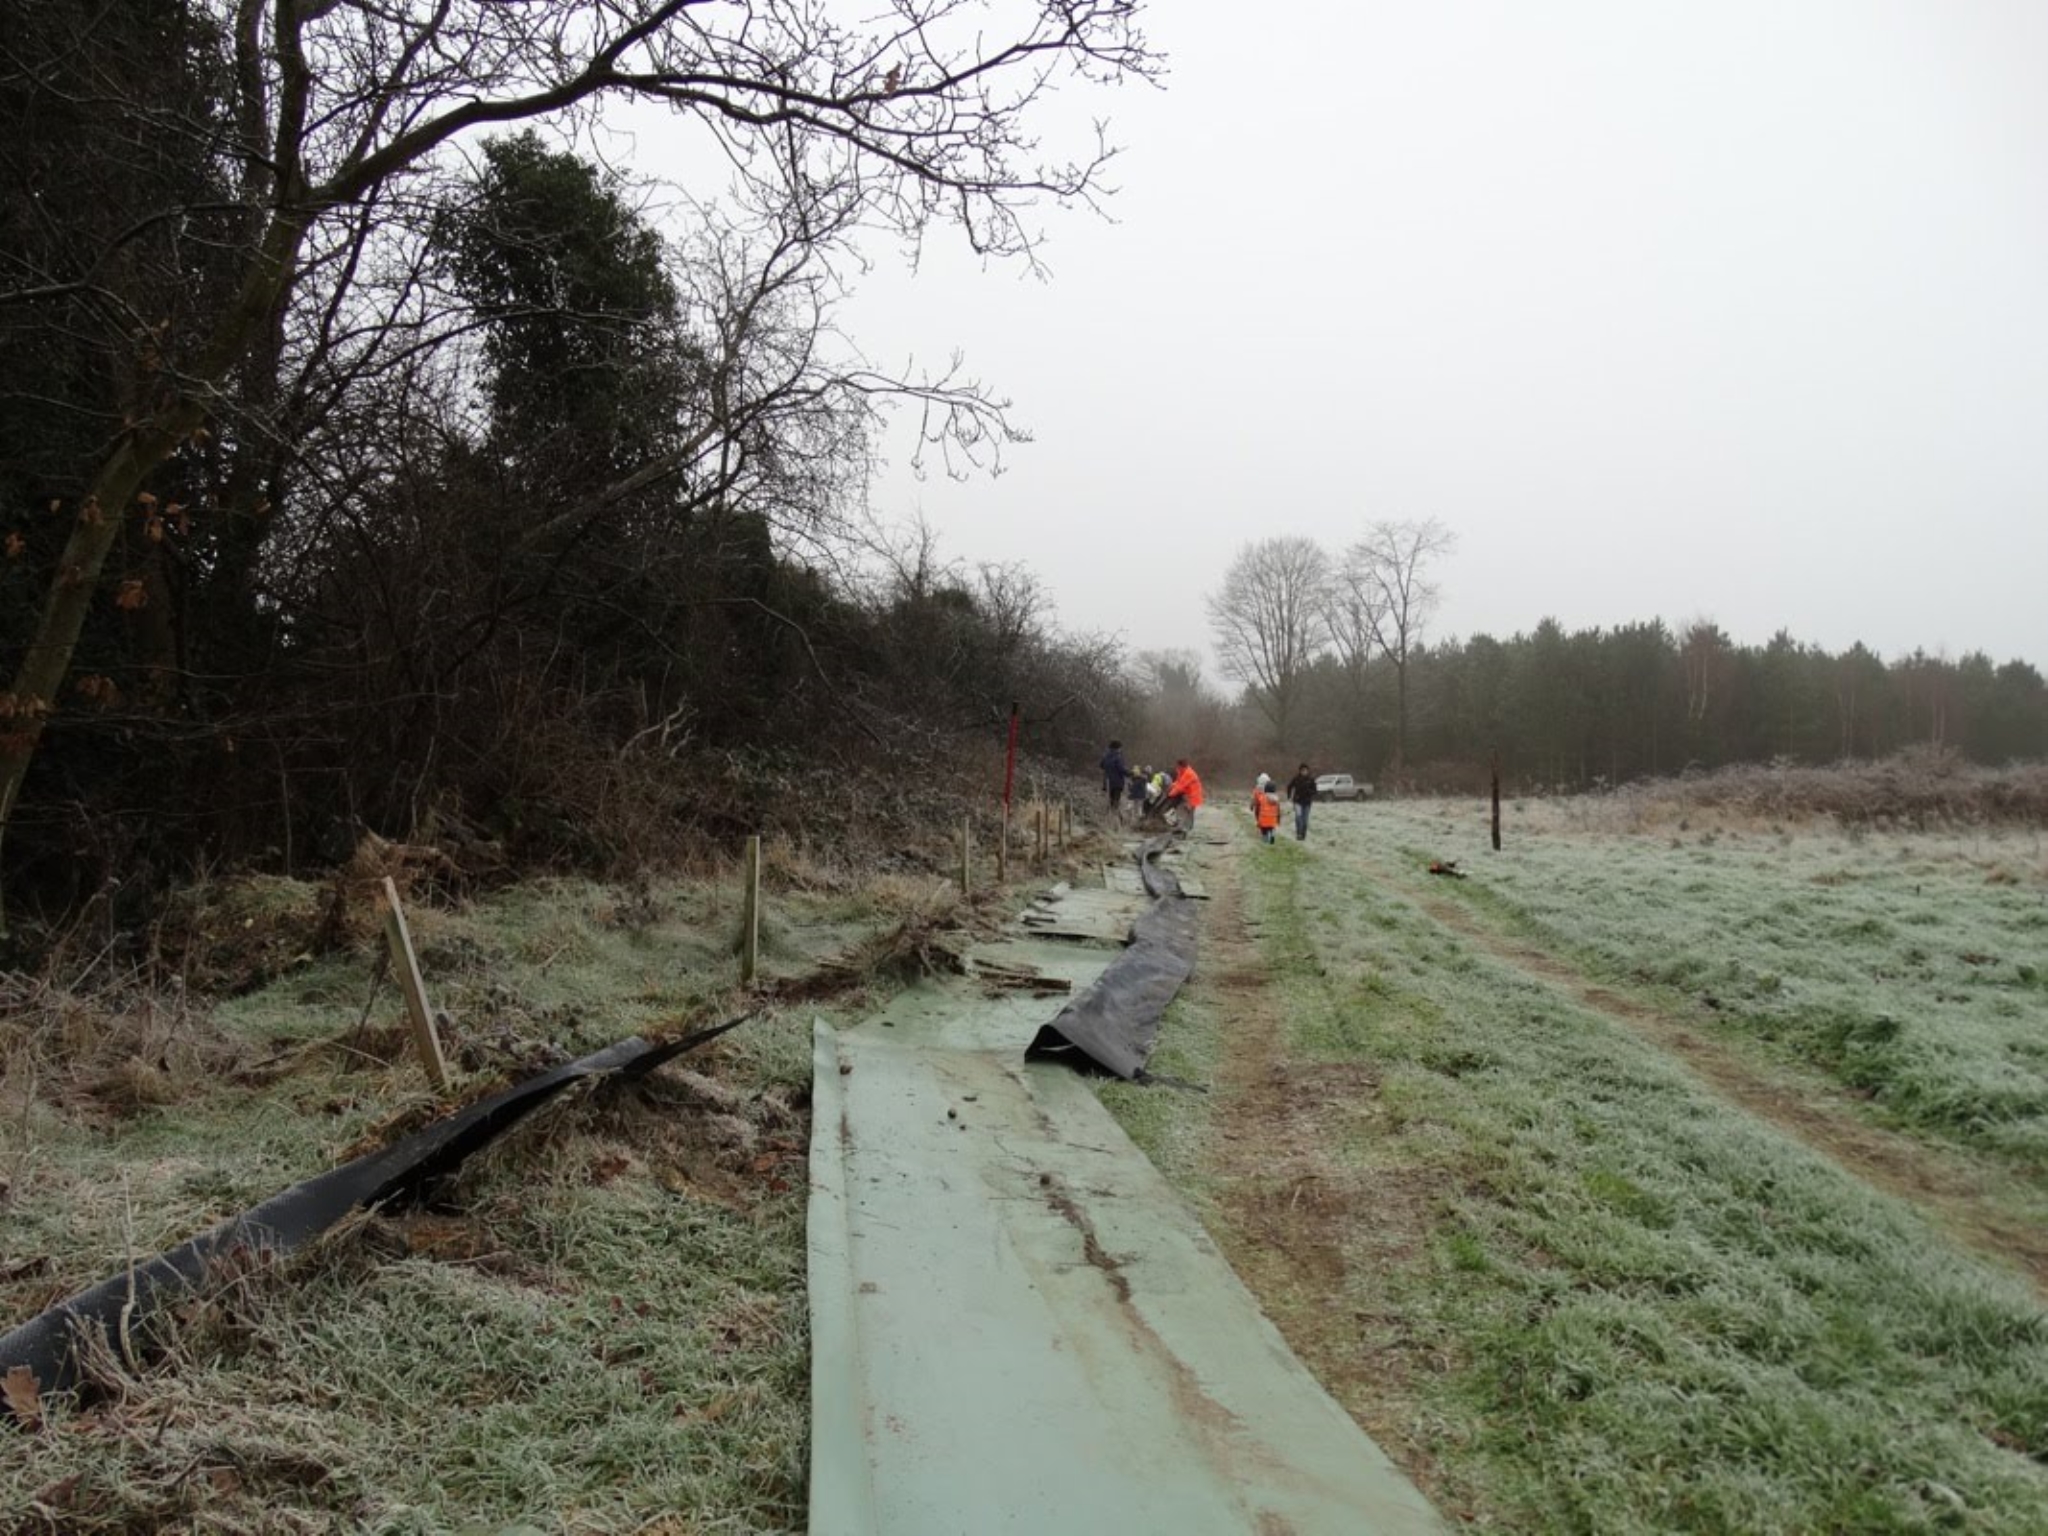 A photo from the FoTF Conservation Event - January 2018 - Erecting the Toad Fence at Cranwich : Sections of the fence lay down on the ground, with volunteers seen working in the far background